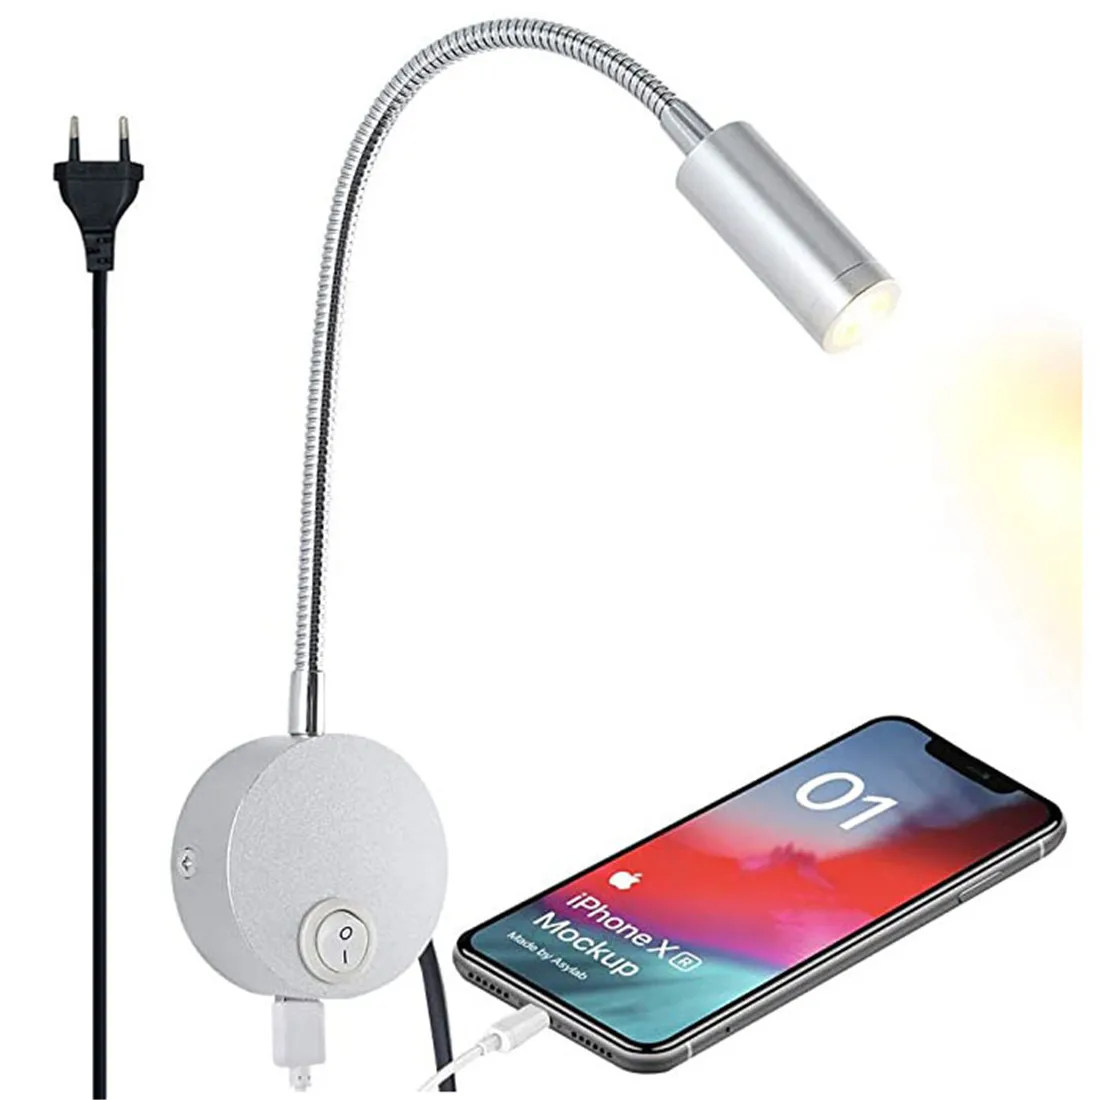 Купи Plug-in Wall Mounted Reading Light with USB Charging Port Flexible LED Bedside Wall Lamp with switch and gooseneck for bedside за 1,019 рублей в магазине AliExpress